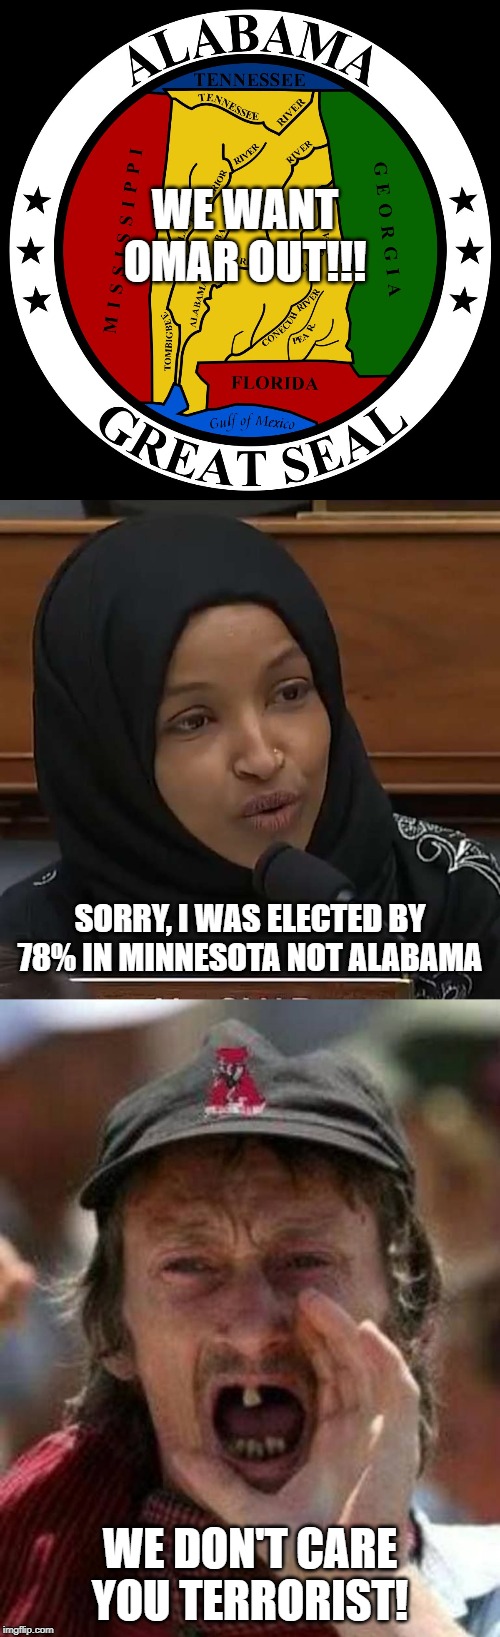 Sweet Home Alabama... | WE WANT OMAR OUT!!! SORRY, I WAS ELECTED BY 78% IN MINNESOTA NOT ALABAMA; WE DON'T CARE YOU TERRORIST! | image tagged in toothless alabama,alabama,ilhan omar | made w/ Imgflip meme maker